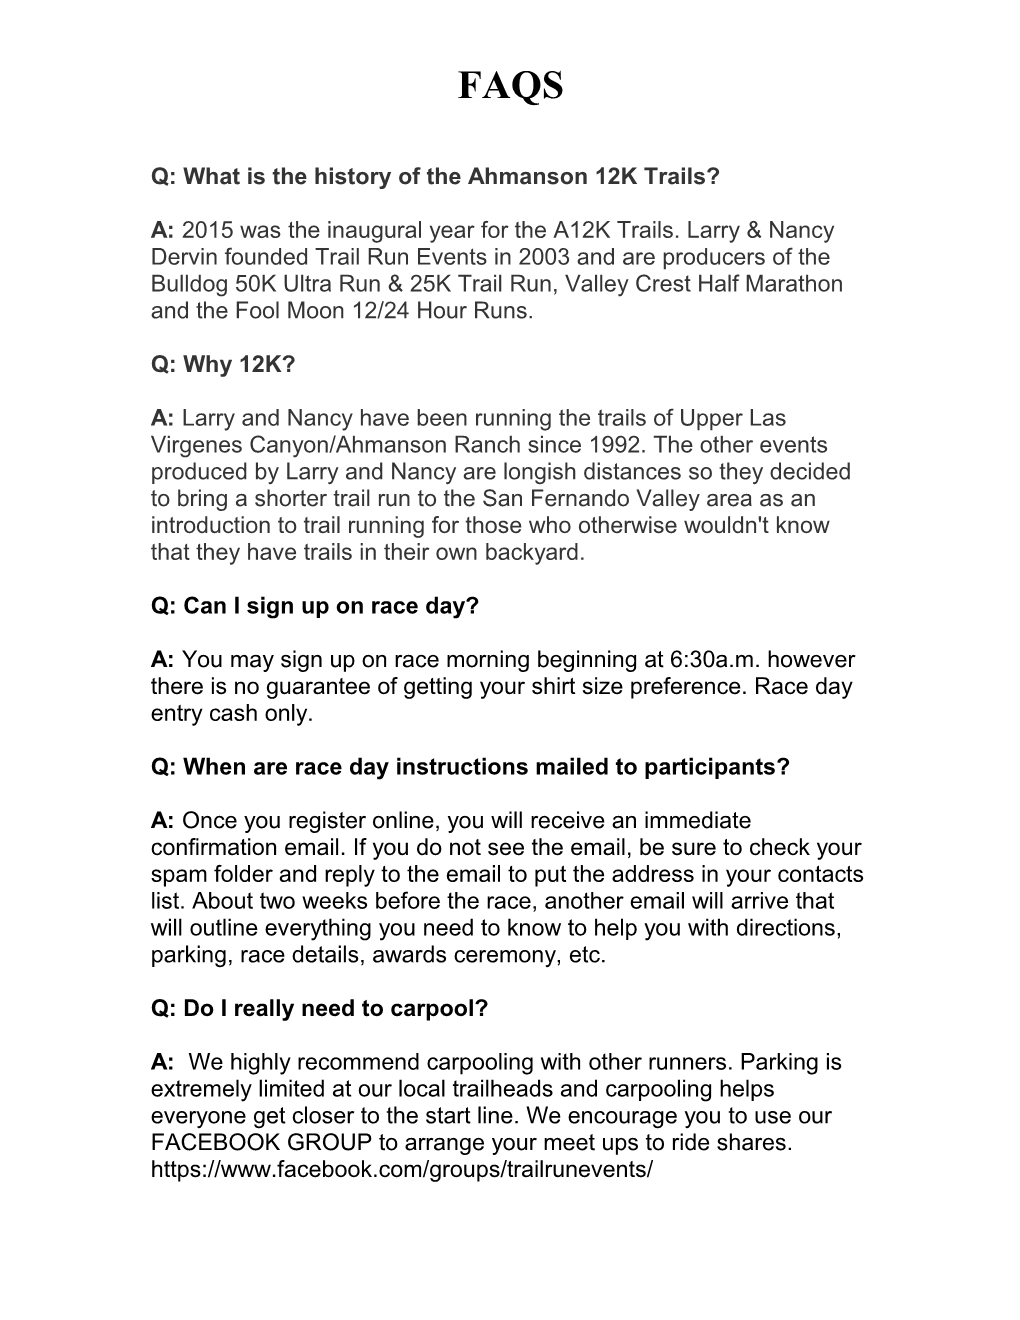 Q: What Is the History of the Ahmanson 12K Trails?